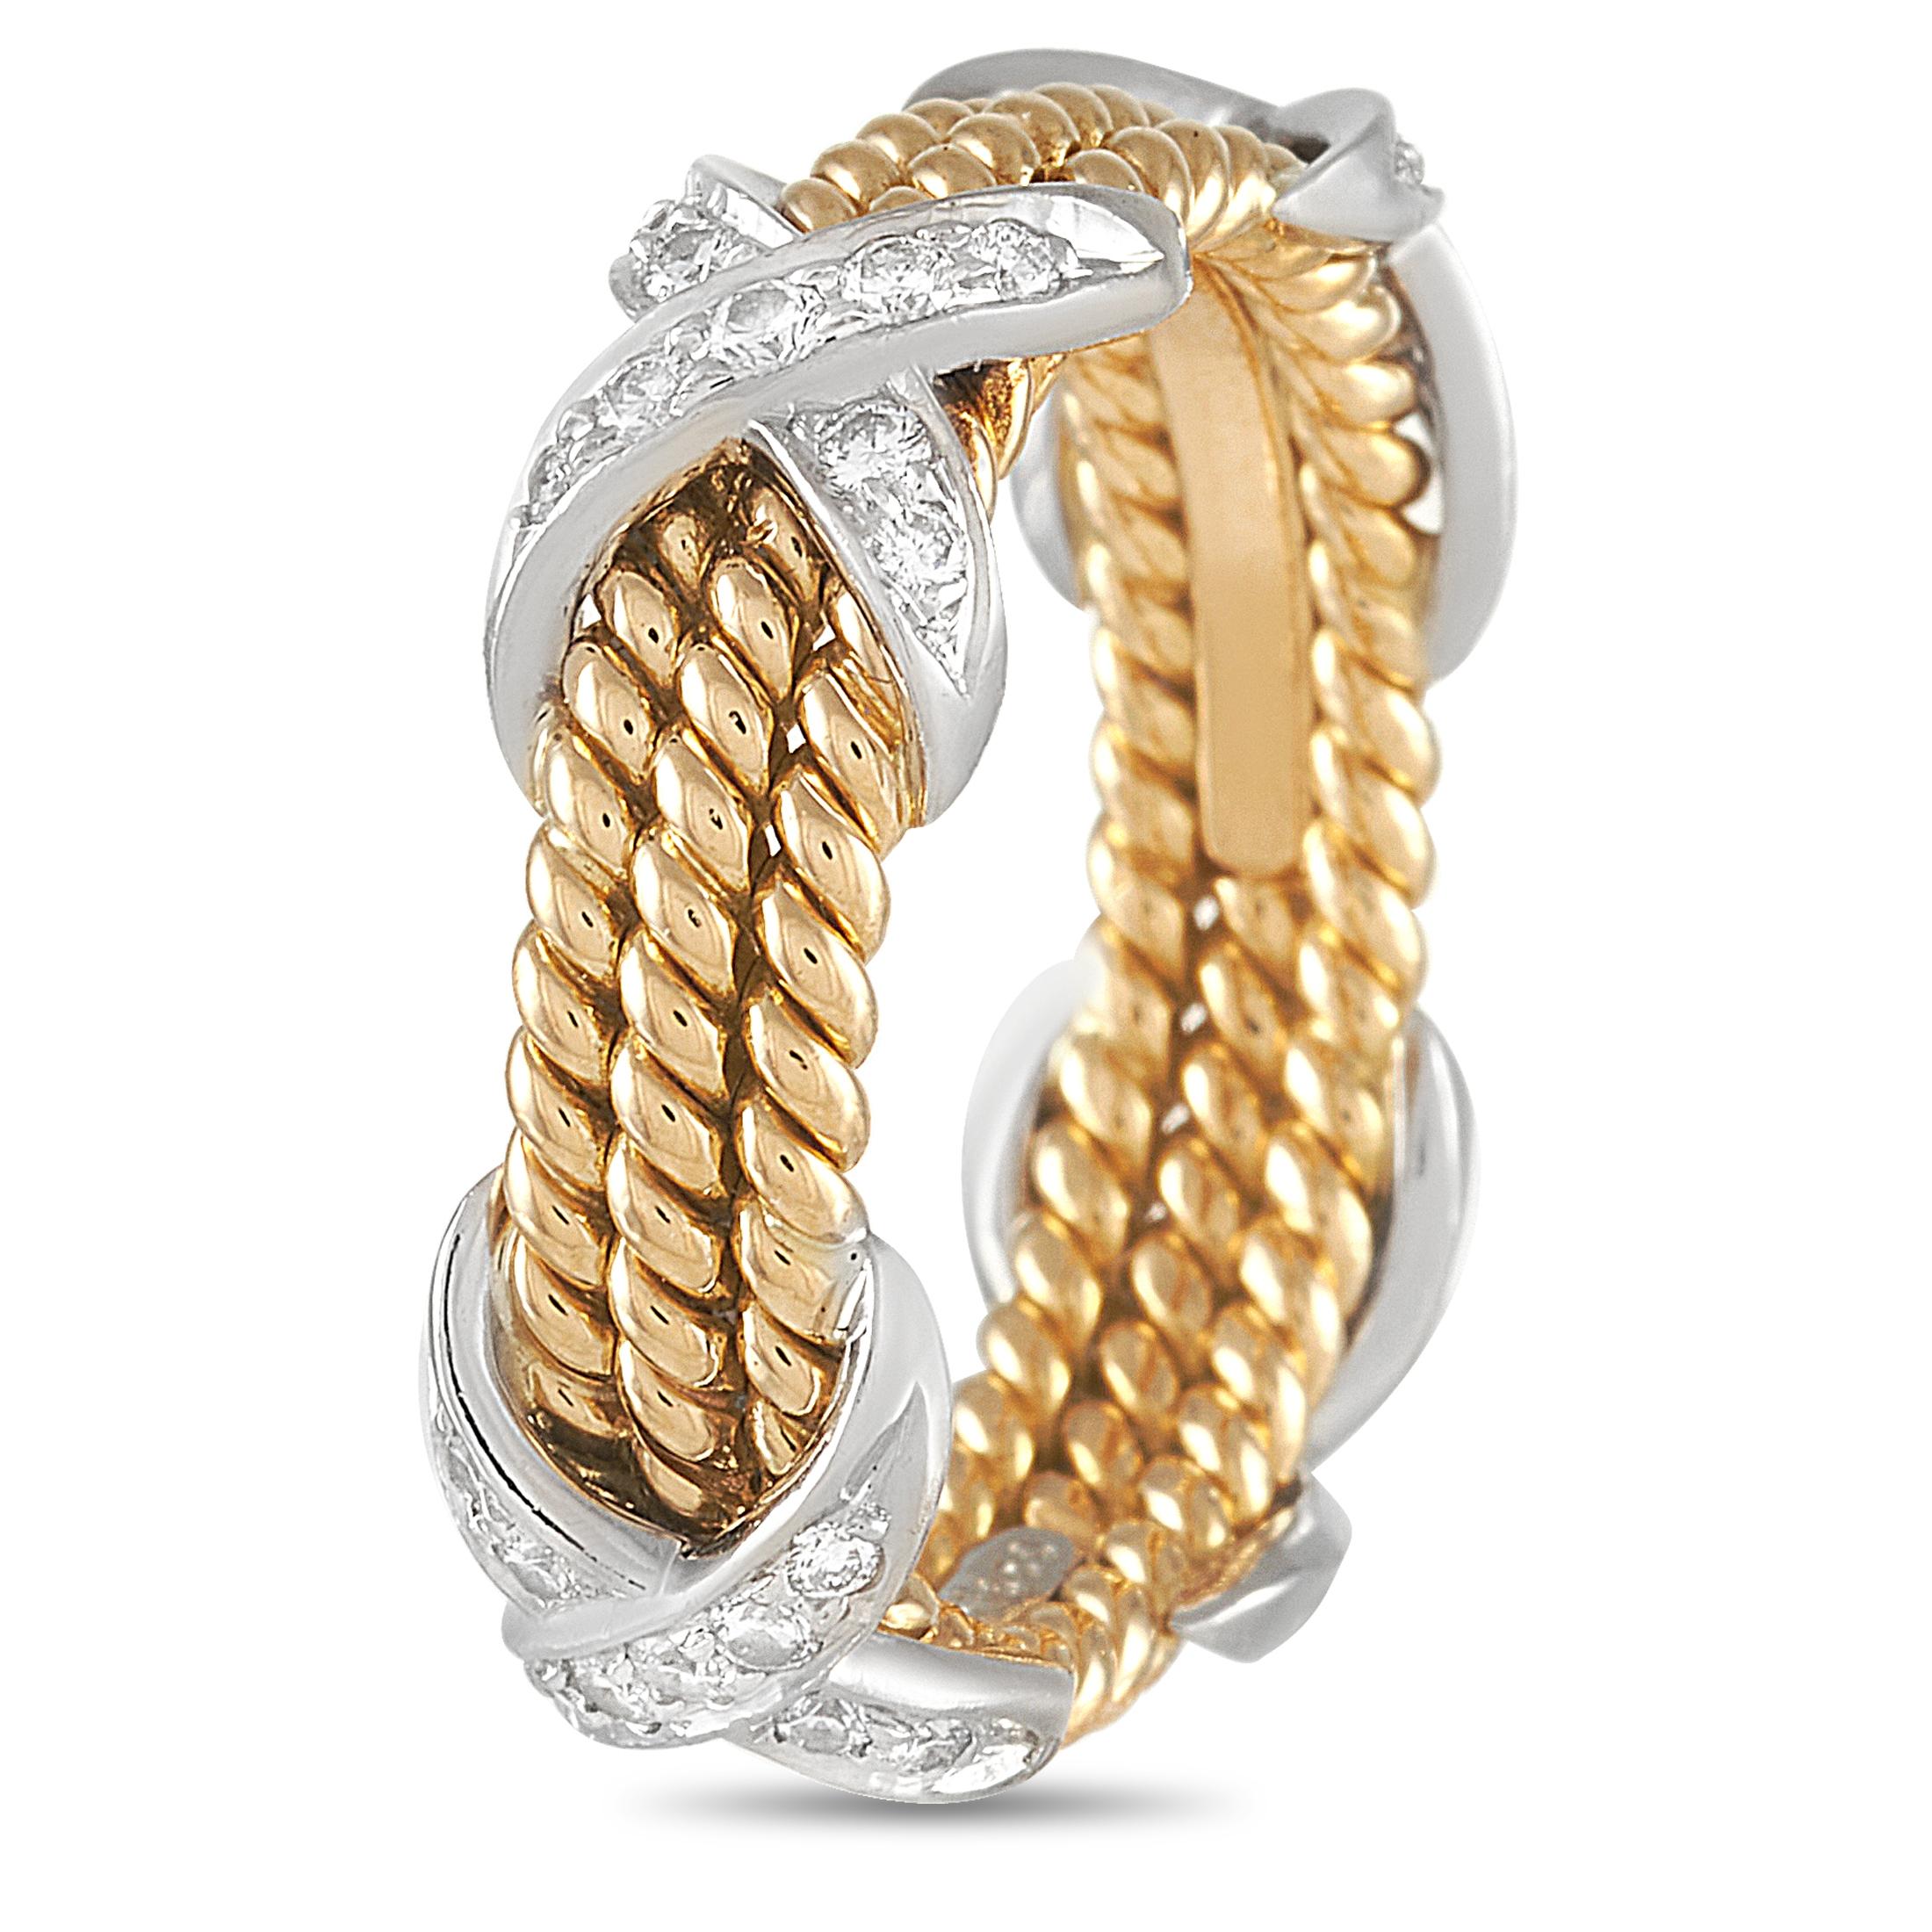 This Tiffany & Co. 18K Yellow and White Gold Diamond Schlumberger Ring is a bold band made with three braided 18K yellow gold bands held together by white gold diamond set x motifs. The ring has a band thickness of 6 mm and a total weight of 7.1